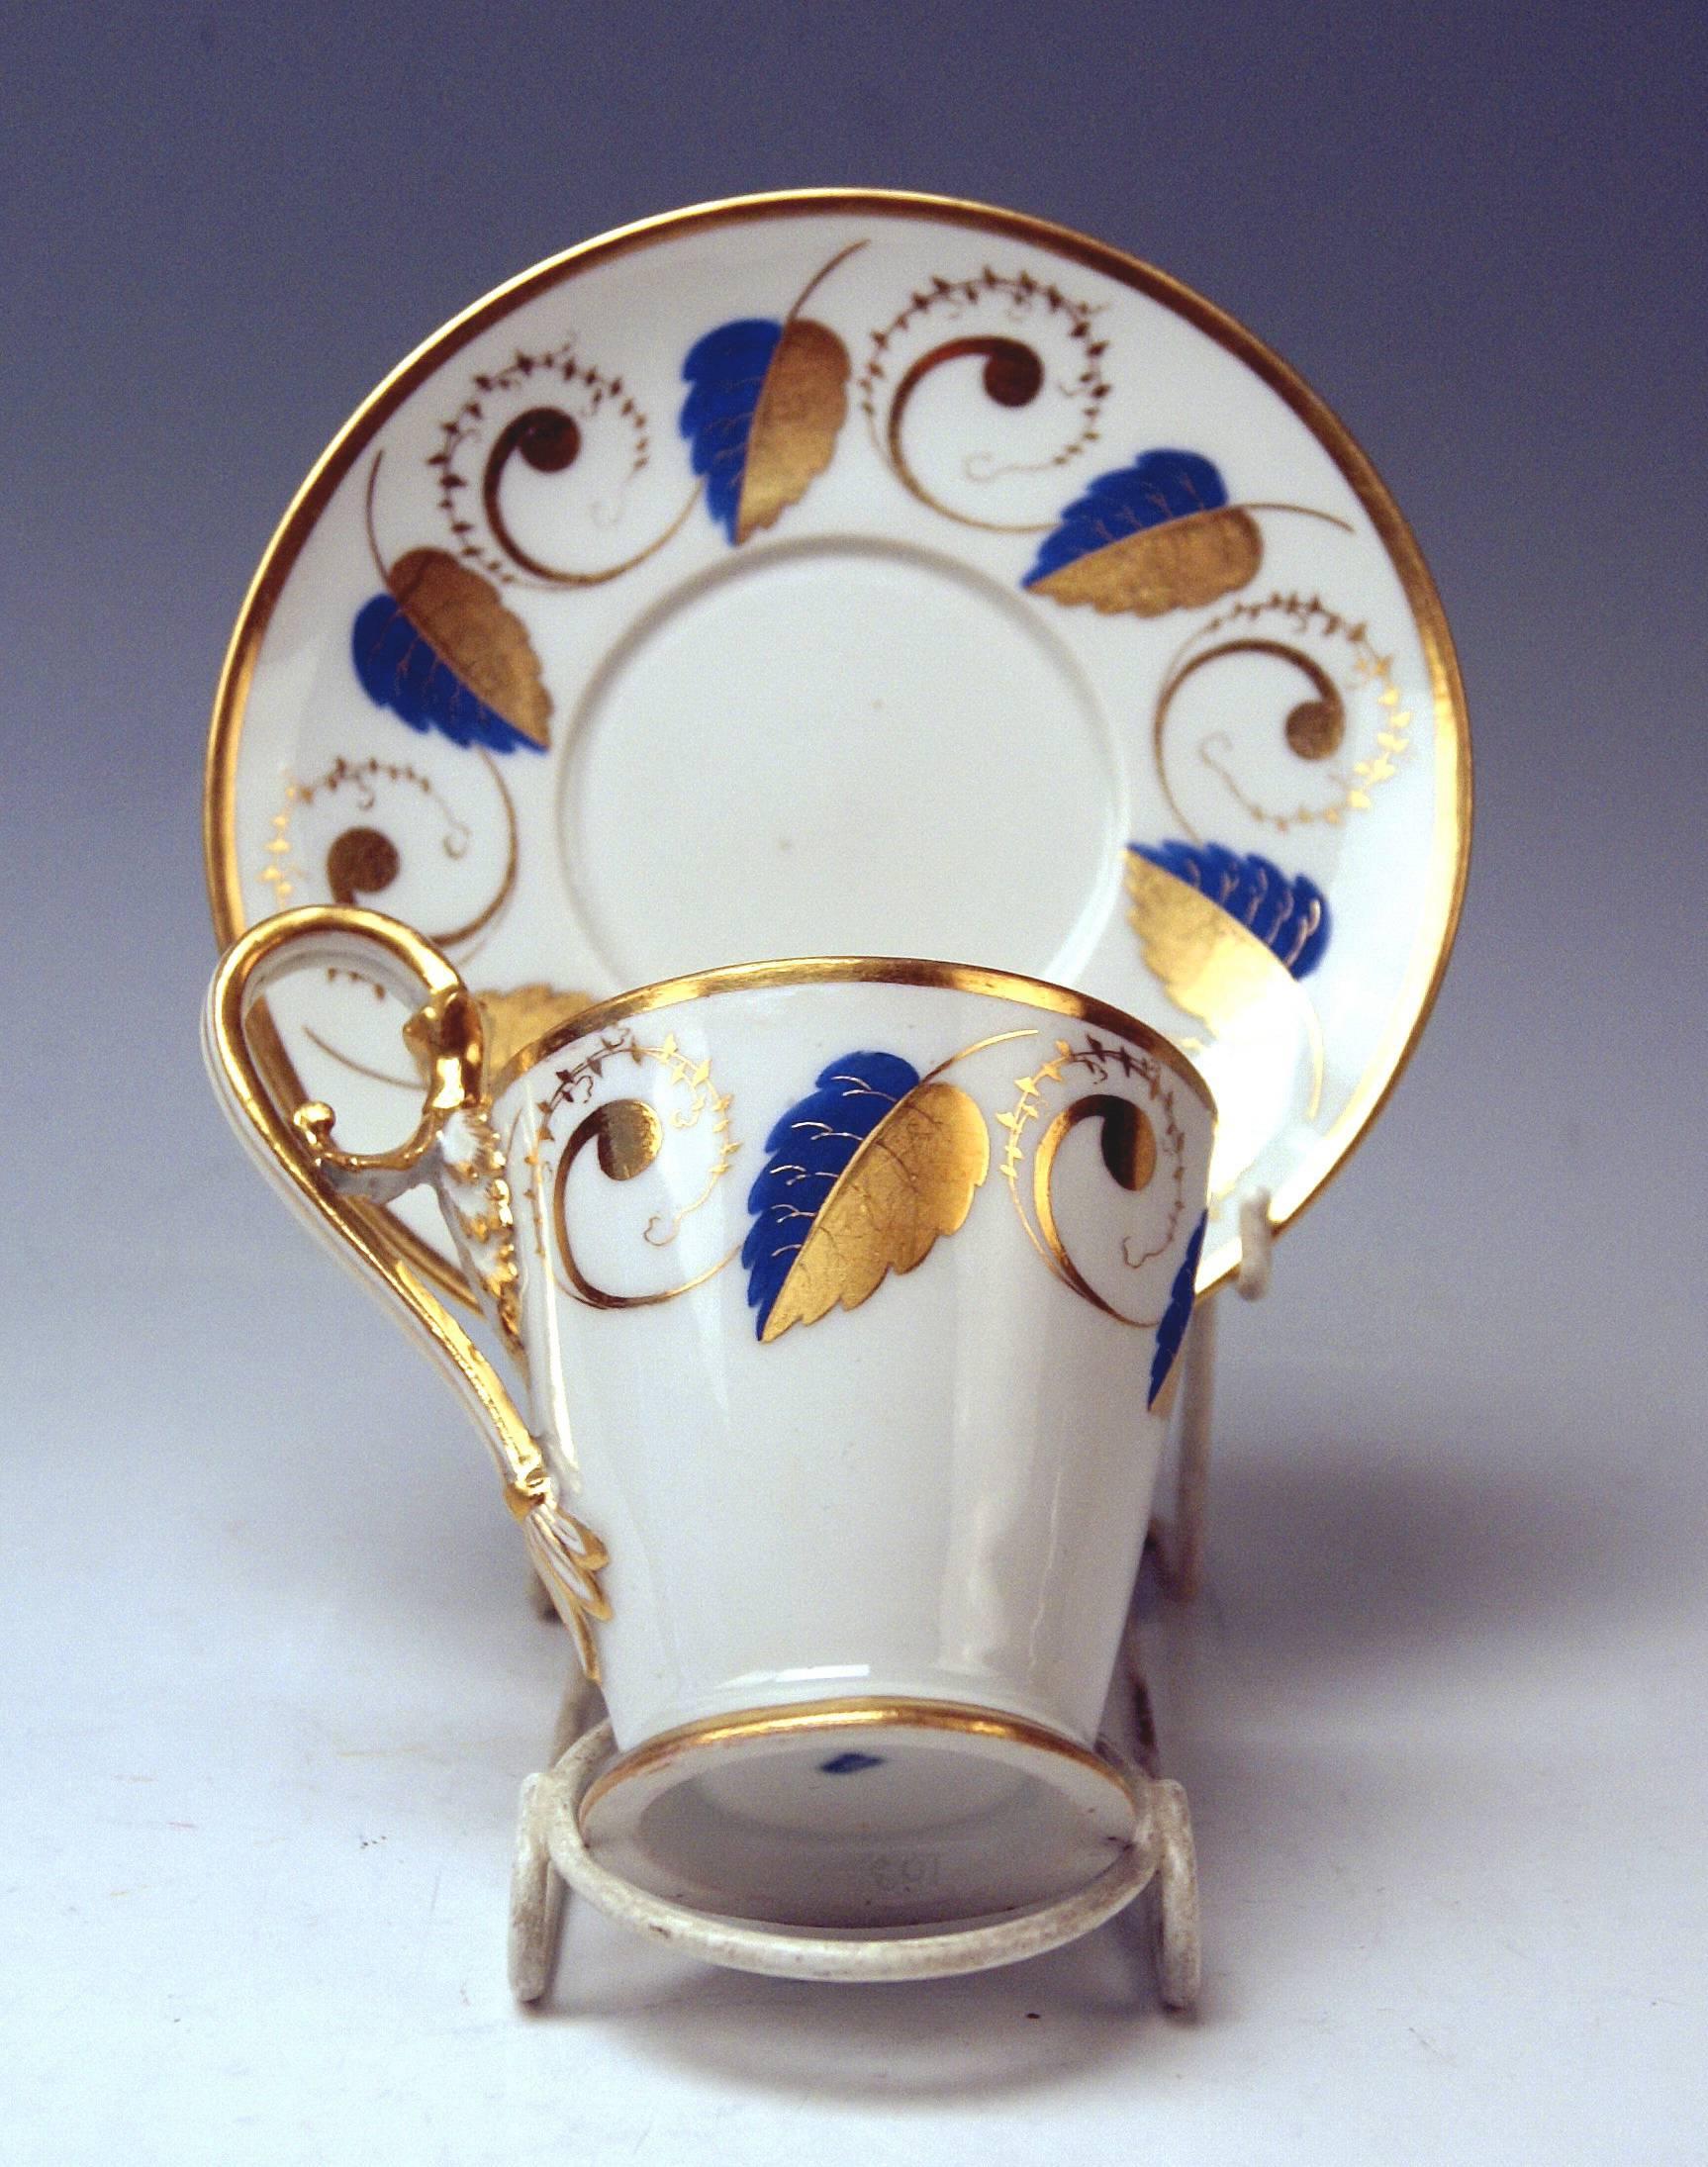 Tapering cup of conical form type with hoisted handle and saucer, both decorated with golden-blue ornaments.

Vienna / Old Imperial Austrian Porcelain Manufactory
(= Alt Wien / Kaiserliche Porzellan Manufaktur)
dated